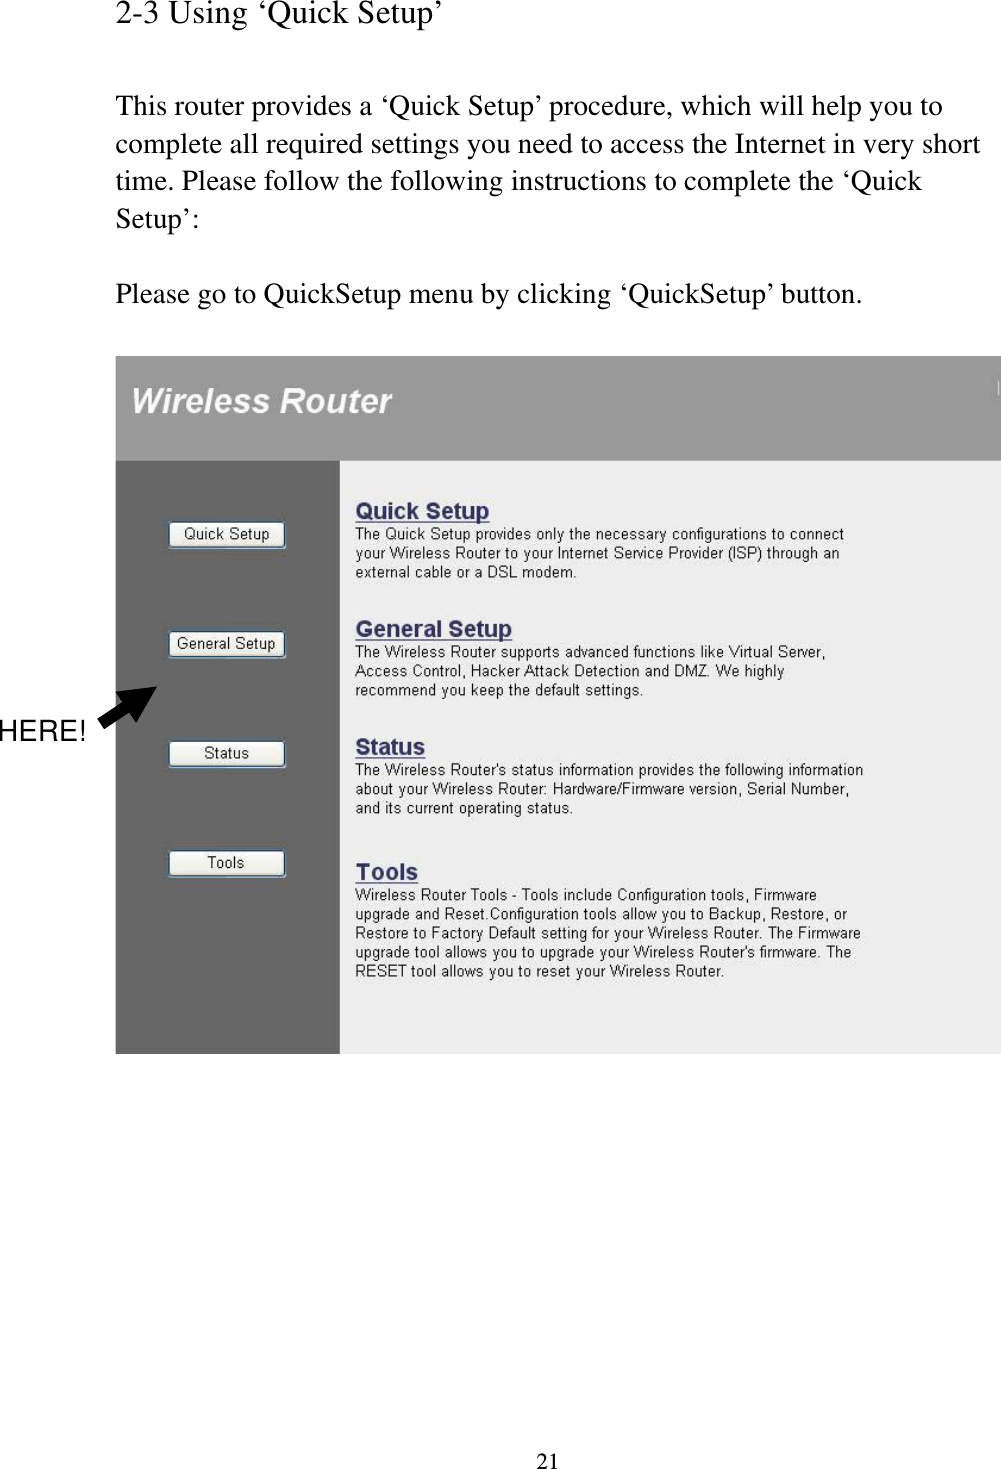 21 2-3 Using ‘Quick Setup’  This router provides a ‘Quick Setup’ procedure, which will help you to complete all required settings you need to access the Internet in very short time. Please follow the following instructions to complete the ‘Quick Setup’:  Please go to QuickSetup menu by clicking ‘QuickSetup’ button.            HERE! 